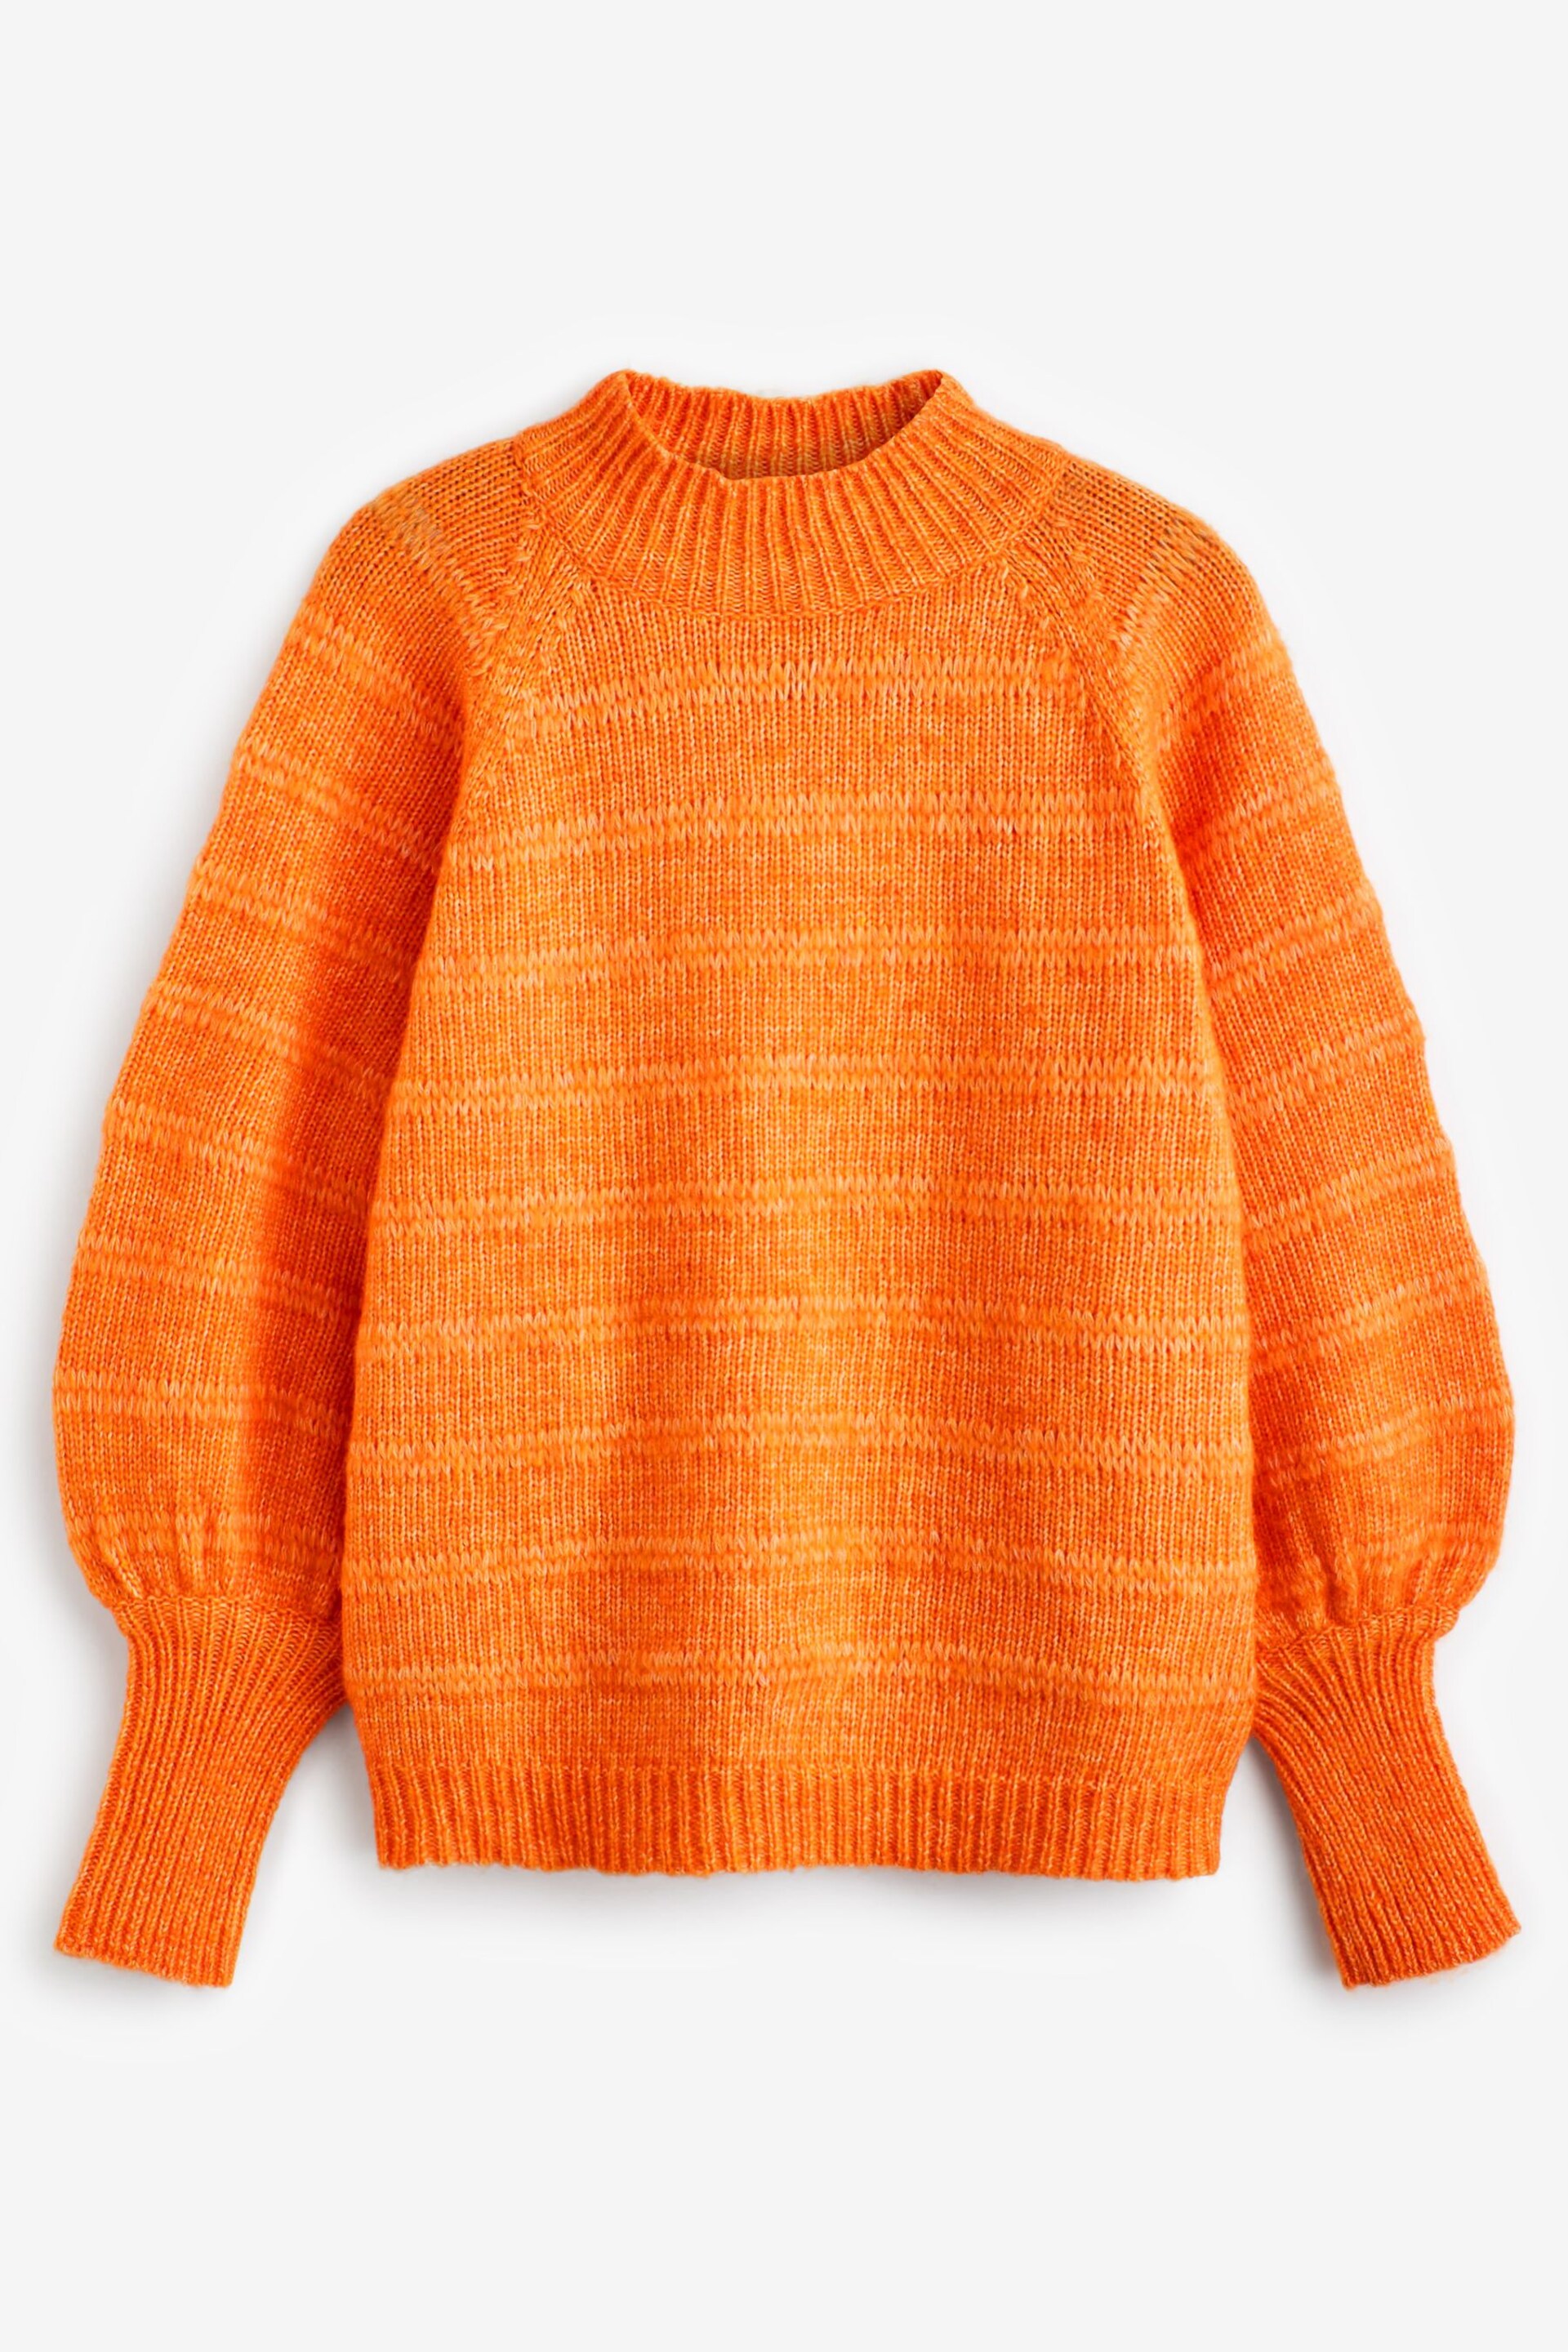 ONLY Orange High Neck Knitted Ribbed Puff Sleeve Jumper - Image 3 of 3